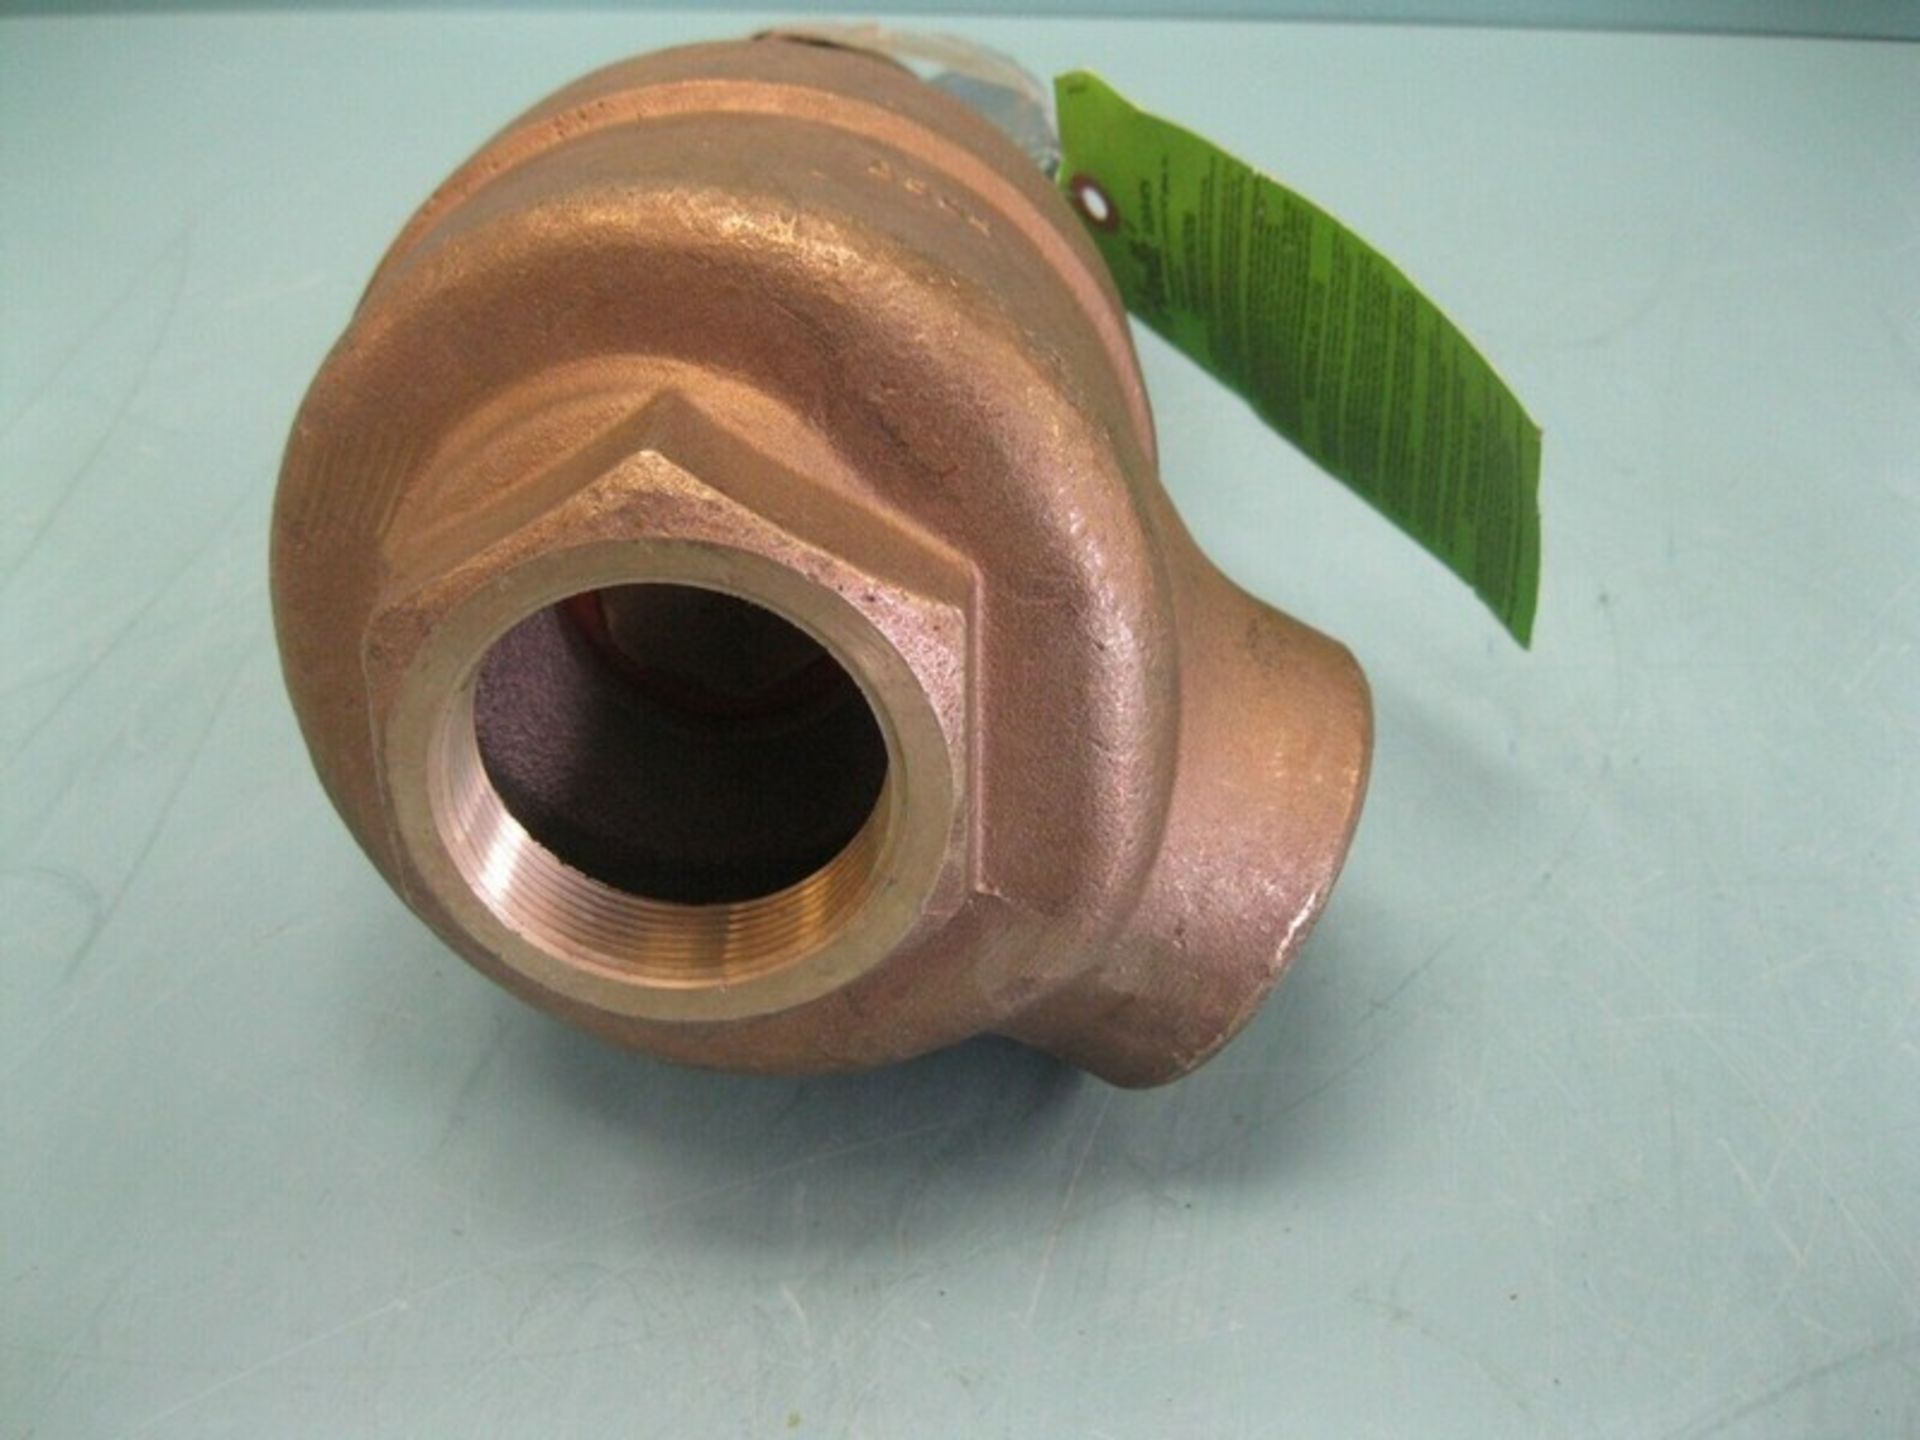 2" x 2-1/2" Apollo RVW61-245 10-618 Bronze Hot Water Relief Valve (Located Springfield, NH)(Handling - Image 4 of 5